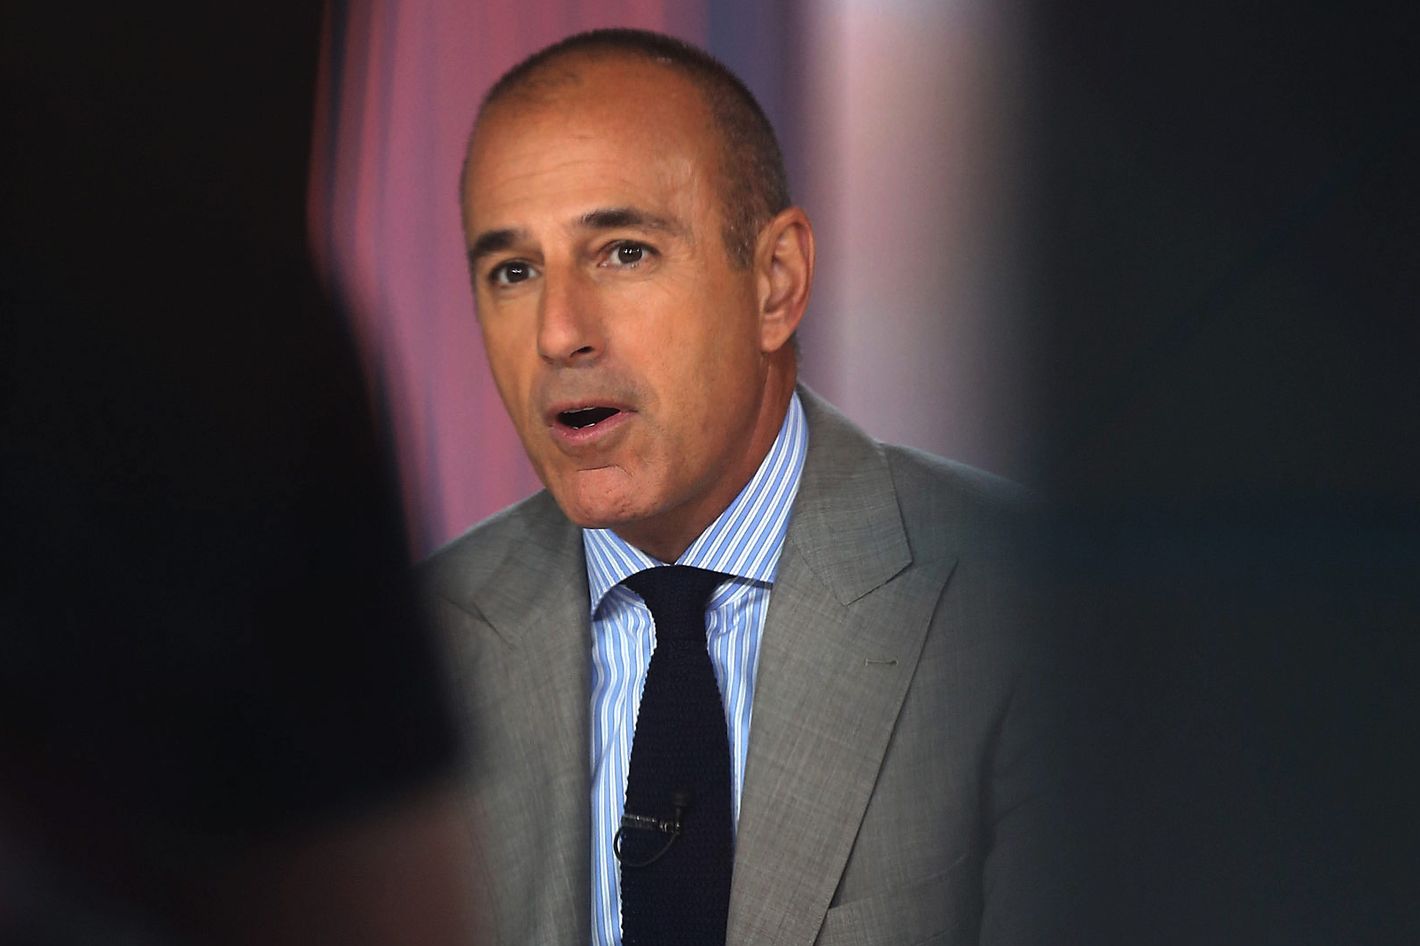 Matt Lauer Controversy And Scandal Explained: Is He Arrested? What happened to Him? 